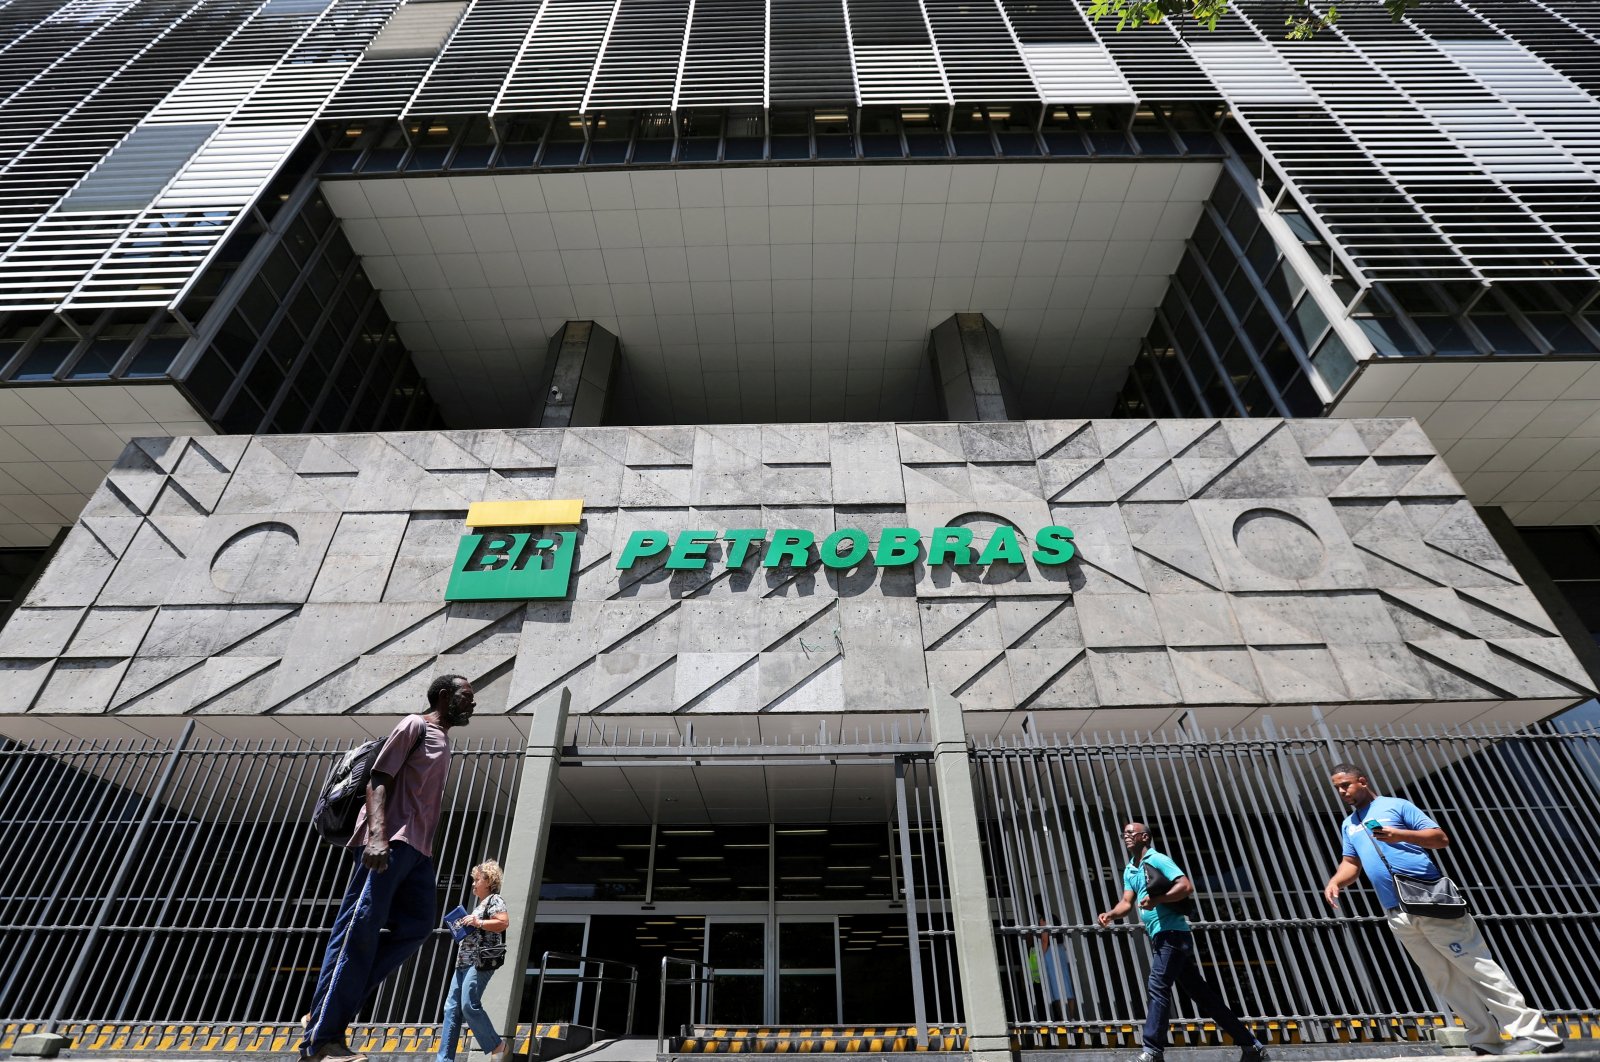 People walk in front of the headquarters of Petroleo Brasileiro S.A. (Petrobas) in Rio de Janeiro, Brazil, March 9, 2020. (Reuters Photo)